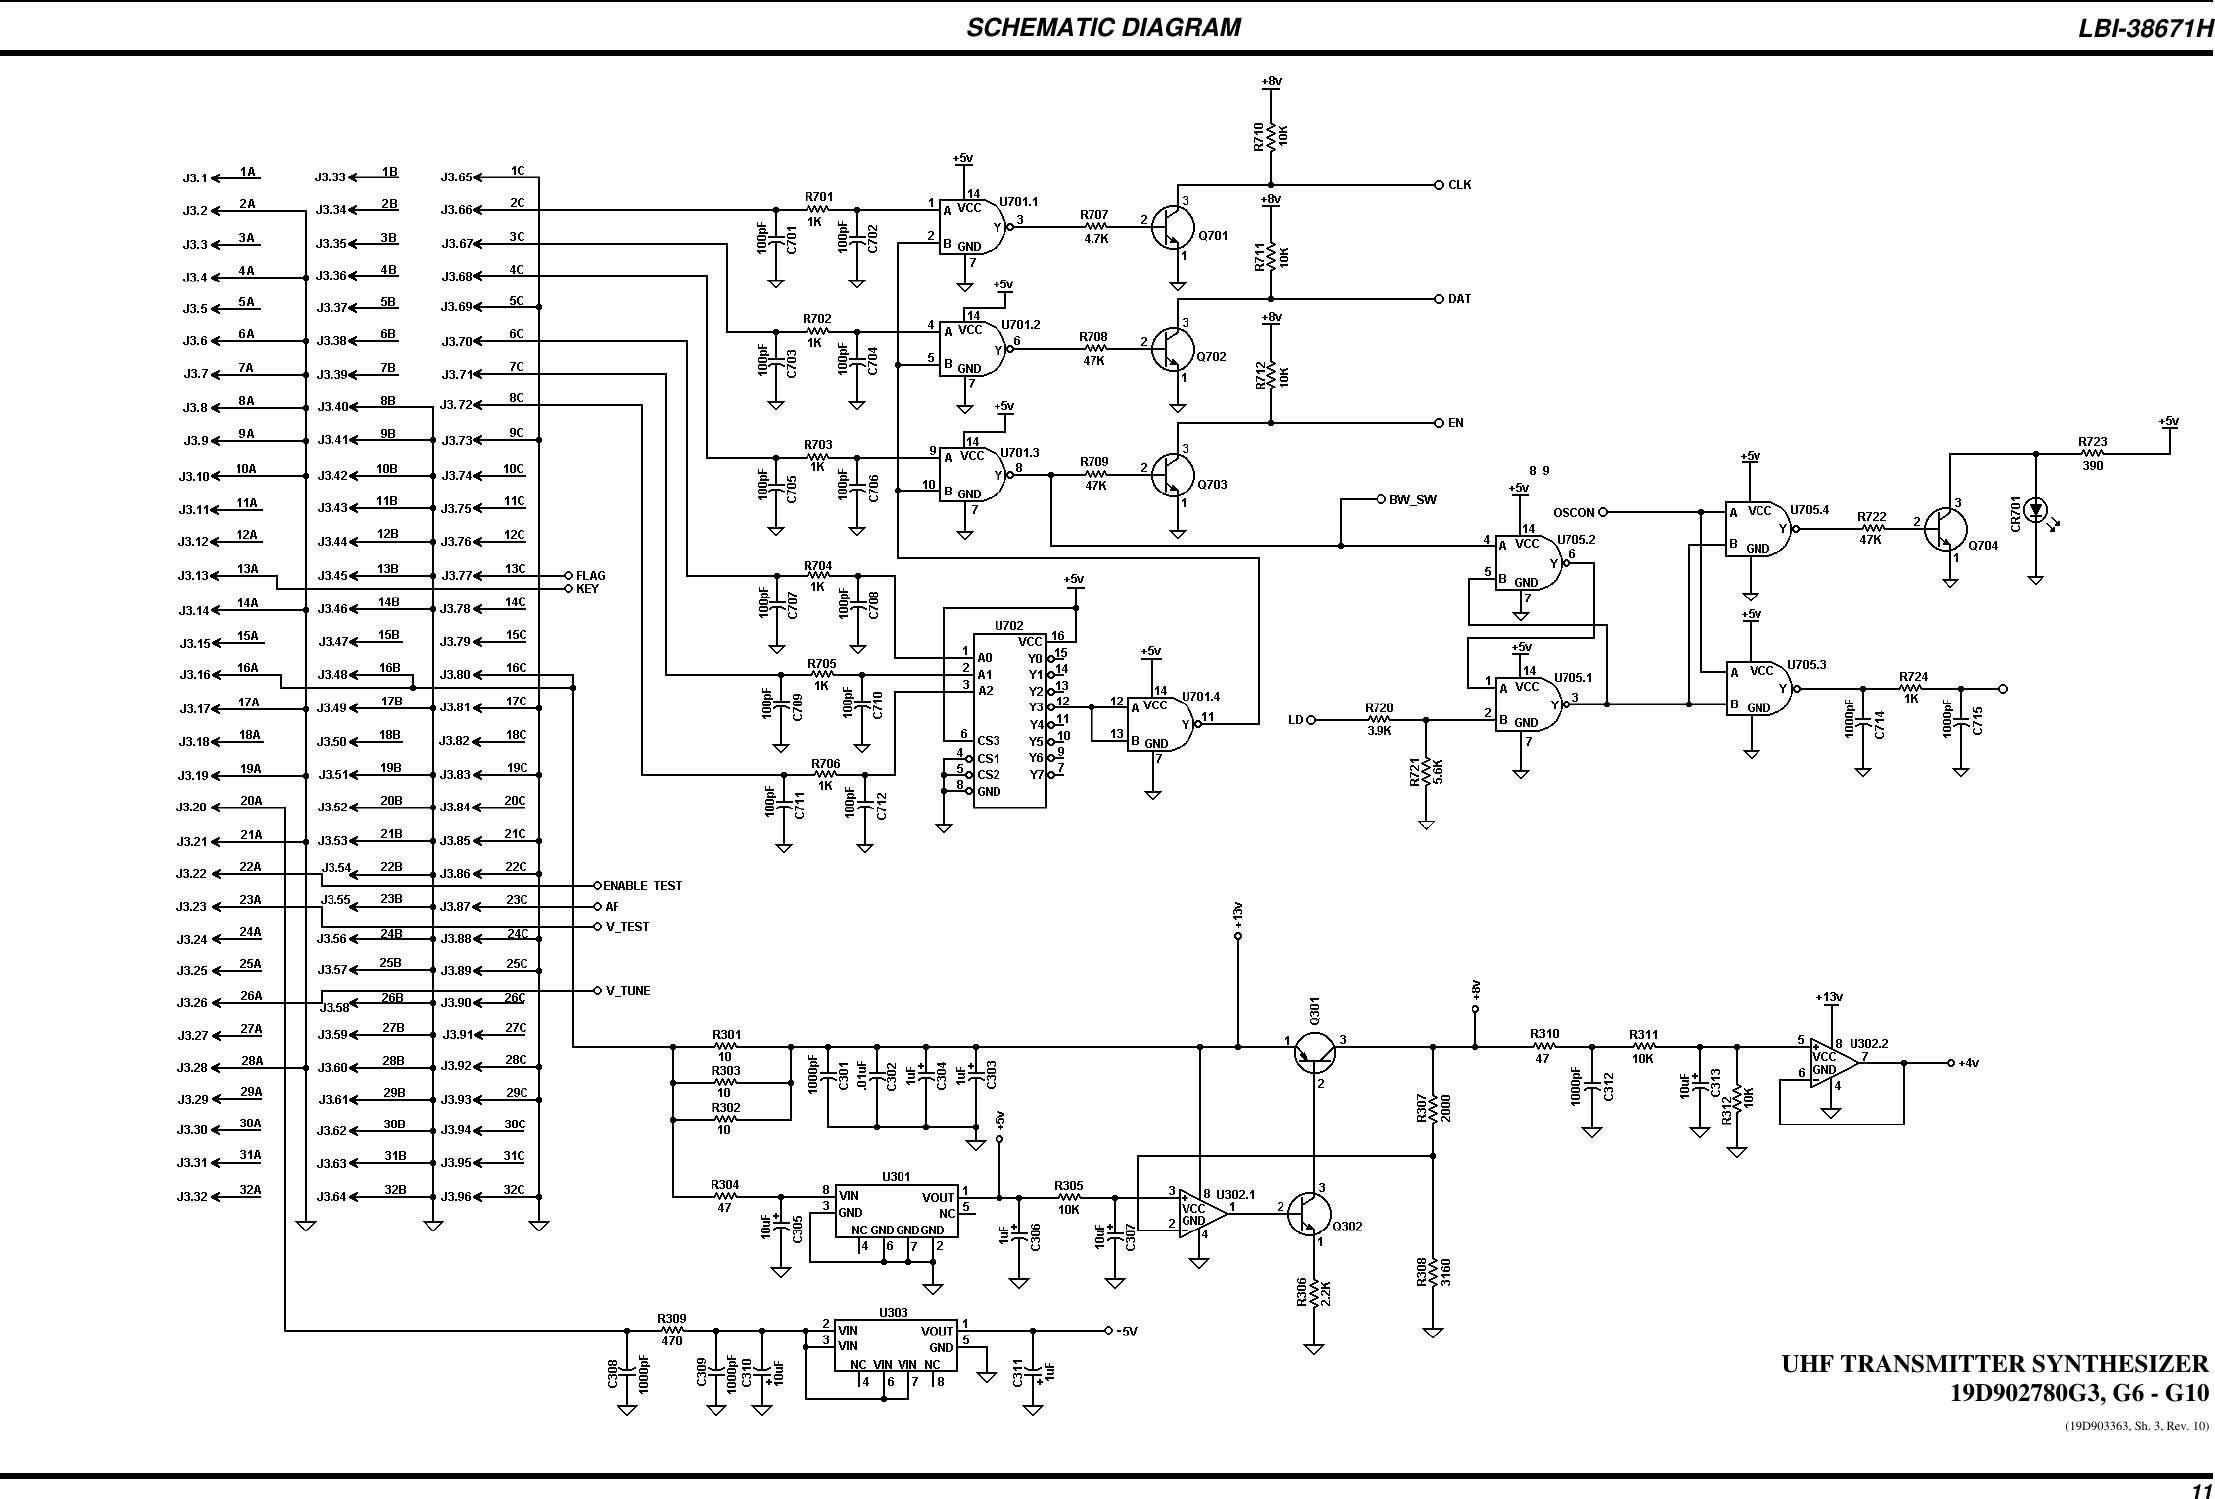 SCHEMATIC DIAGRAMUHF TRANSMITTER SYNTHESIZER19D902780G3, G6 - G10(19D903363, Sh. 3, Rev. 10)LBI-38671H11